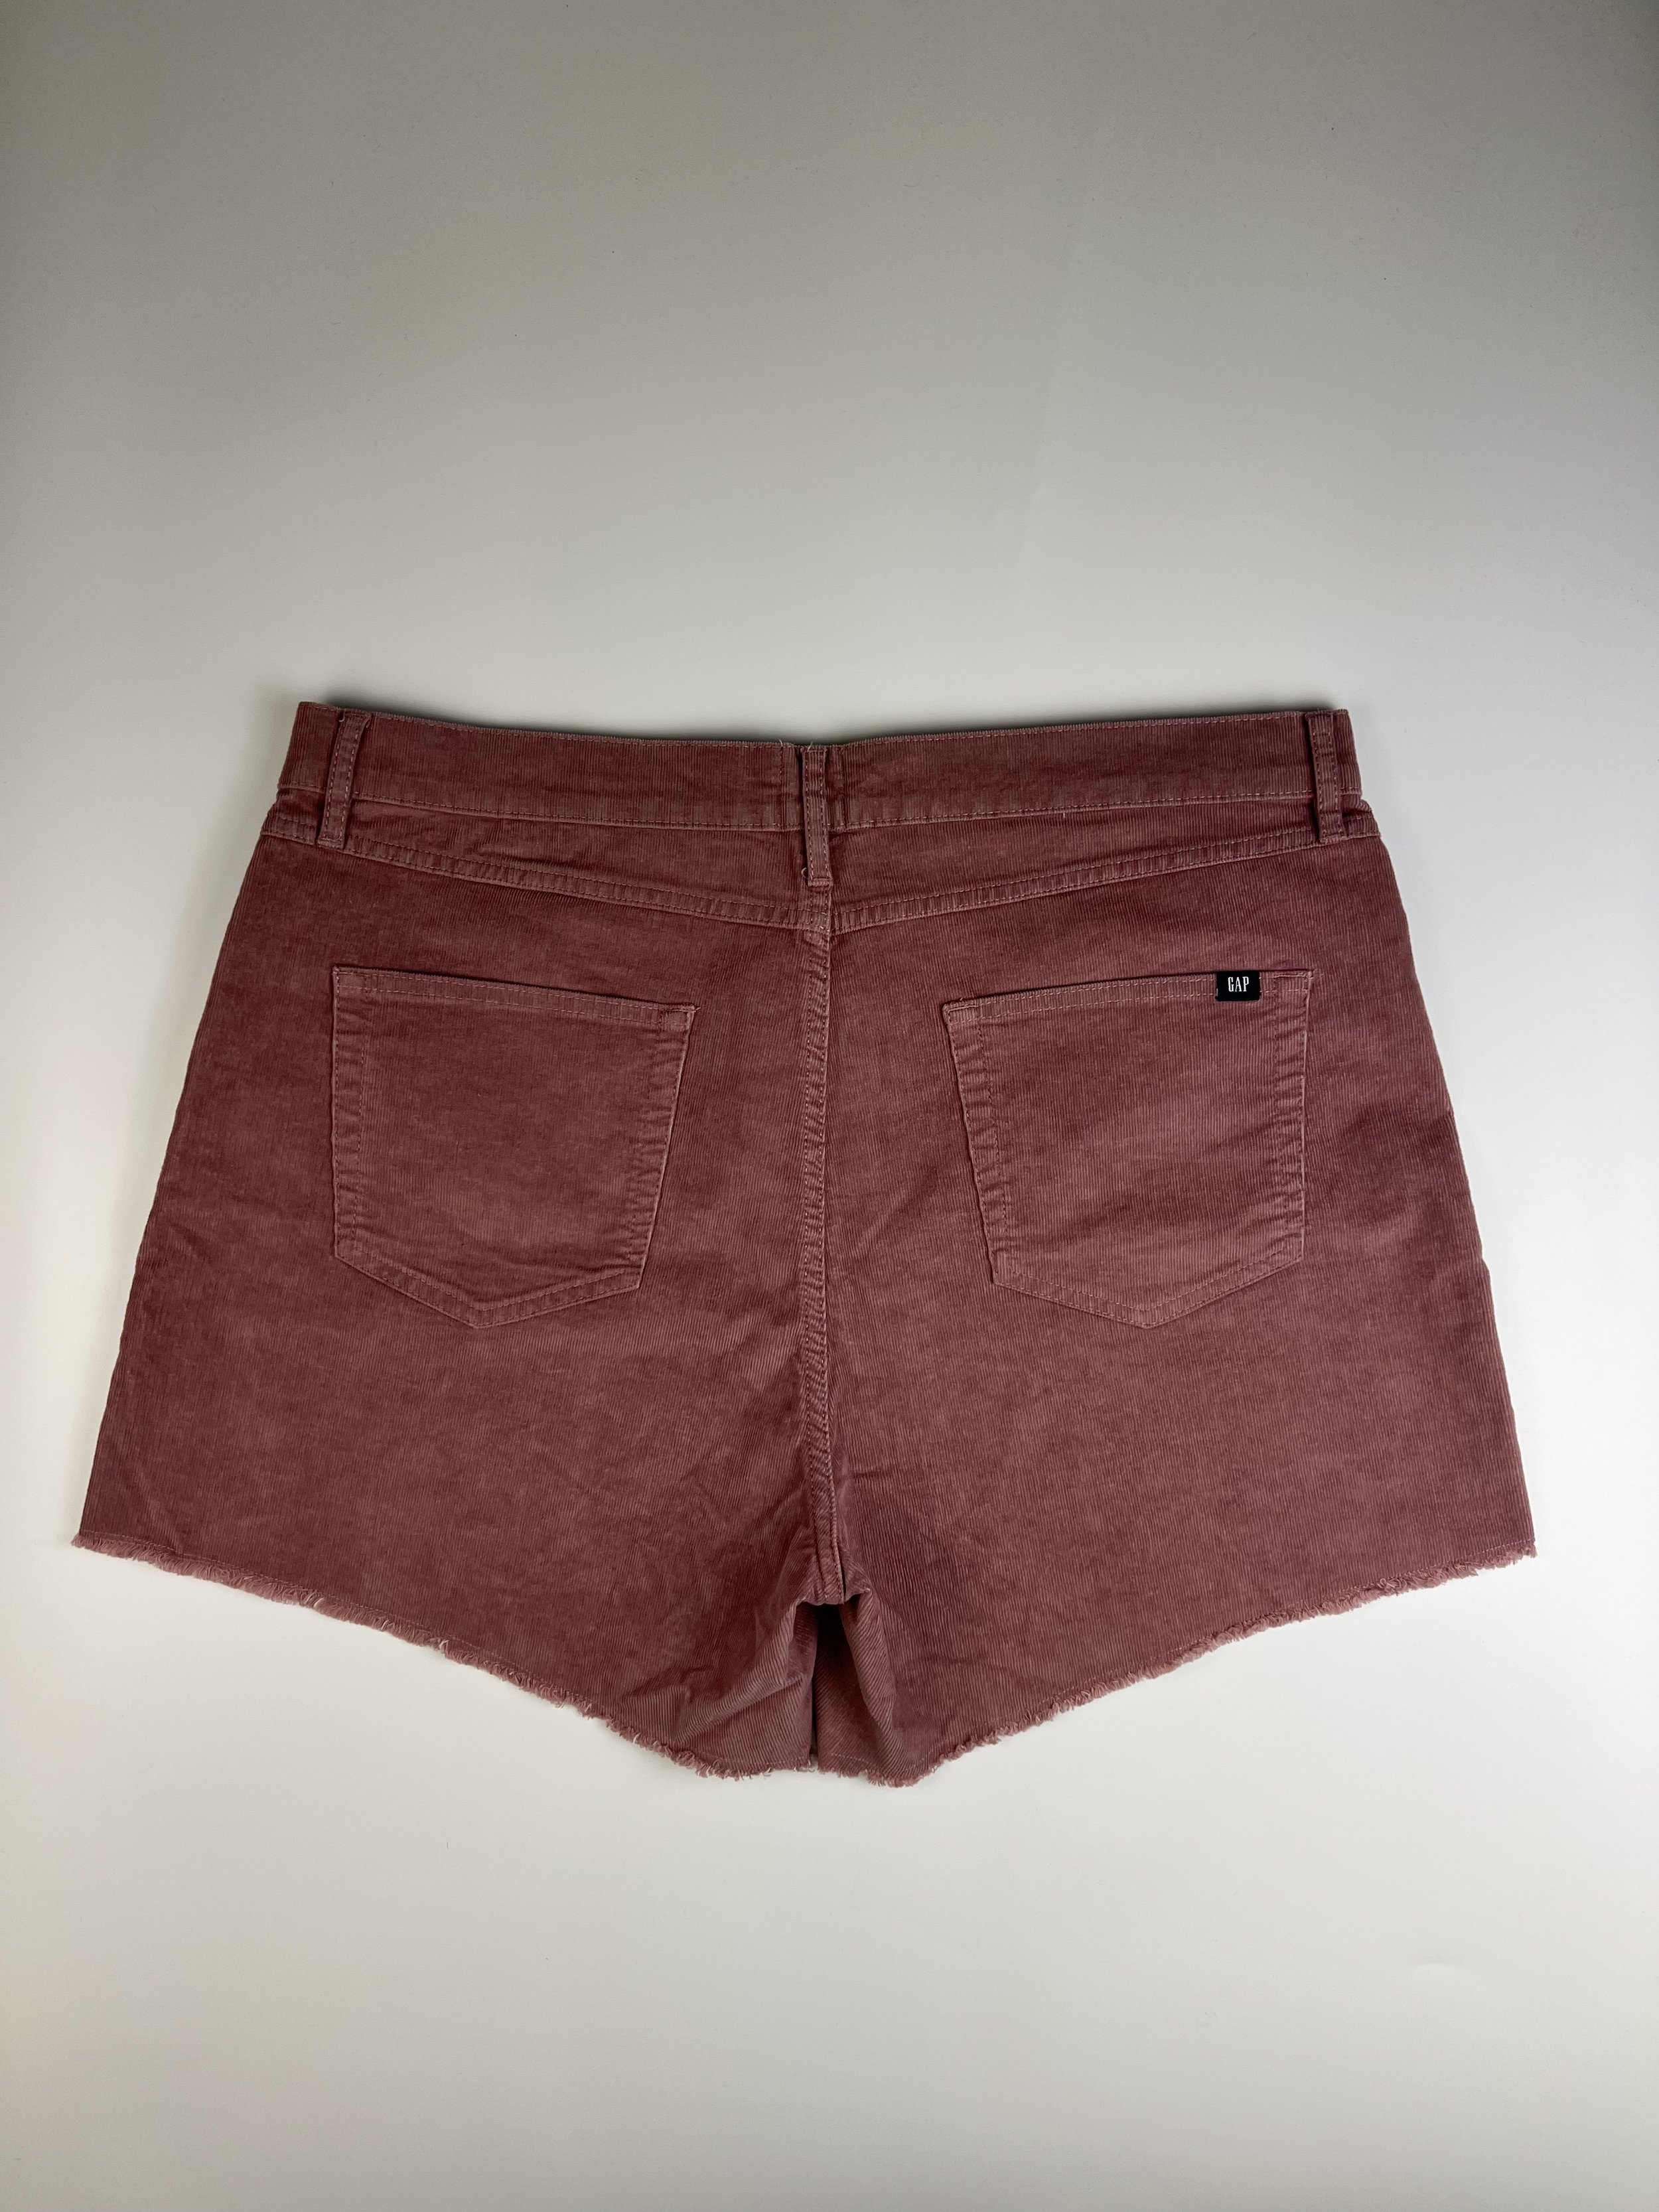 Men's Champion Joggers, Burgundy - Sizes L / XL — Fashion Cents Consignment  & Thrift Stores in Ephrata, Strasburg, East Earl, Morgantown PA